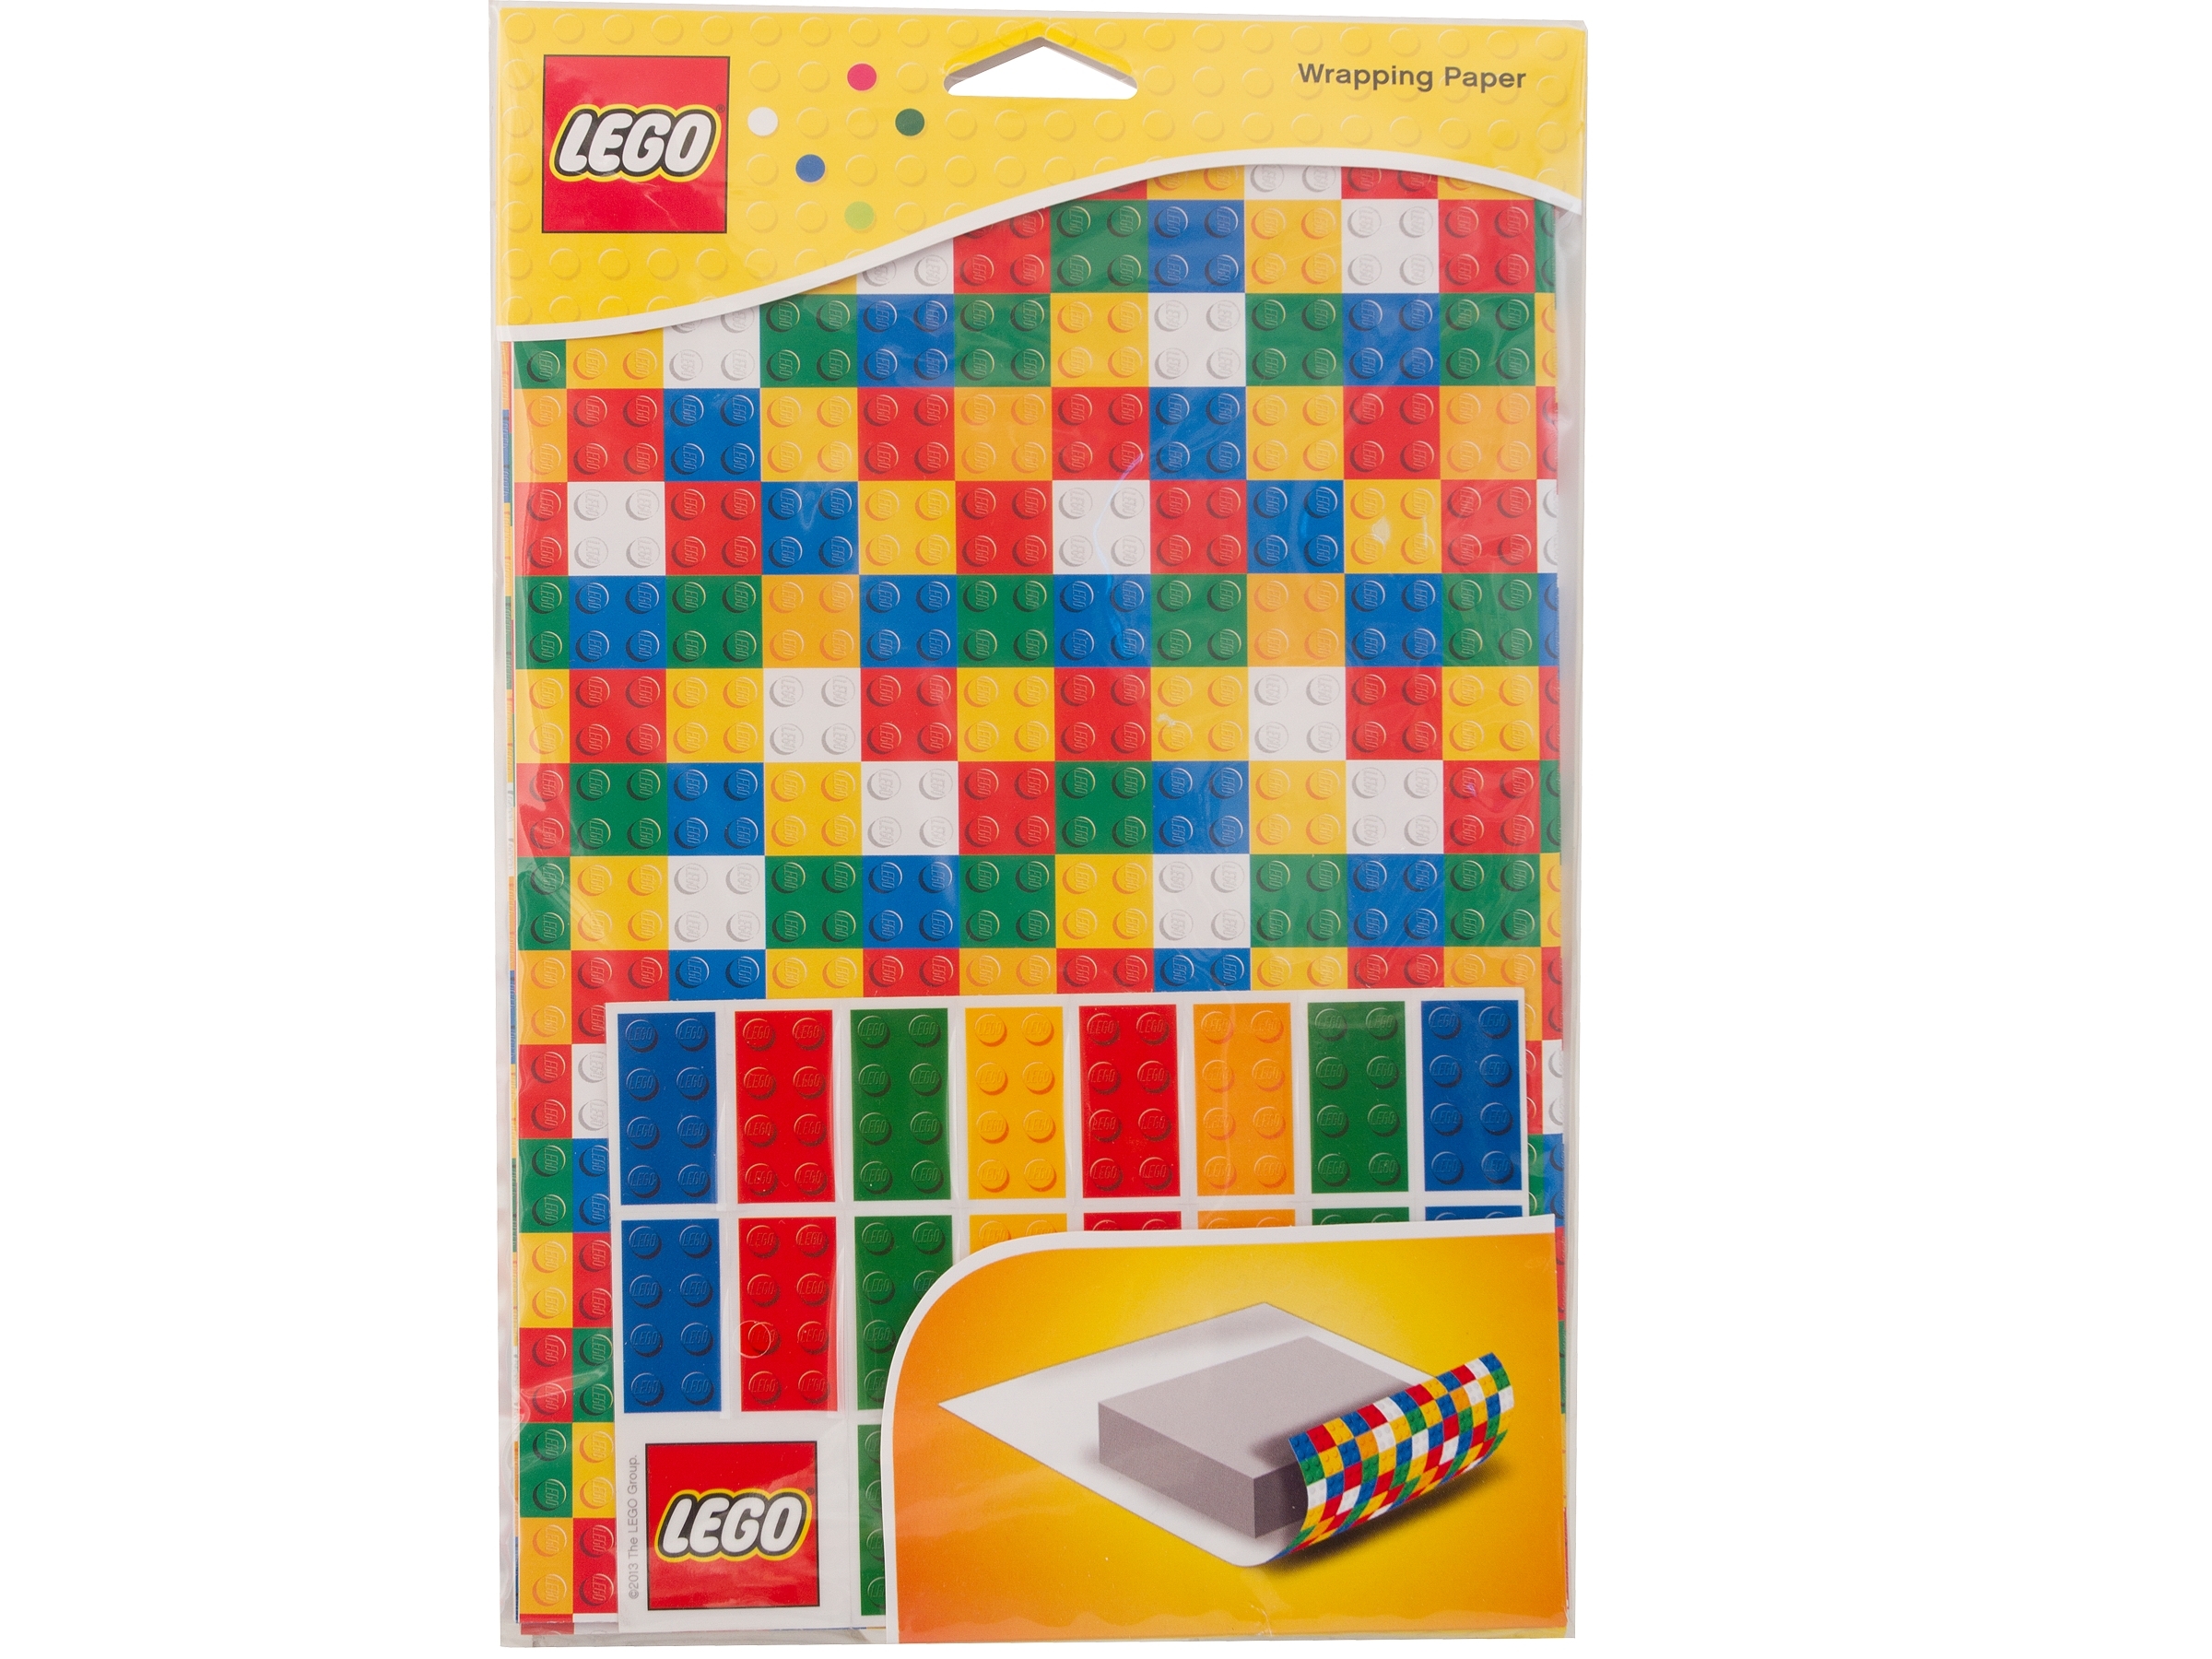 Never wrap a gift again with the LEGO wrapping factory